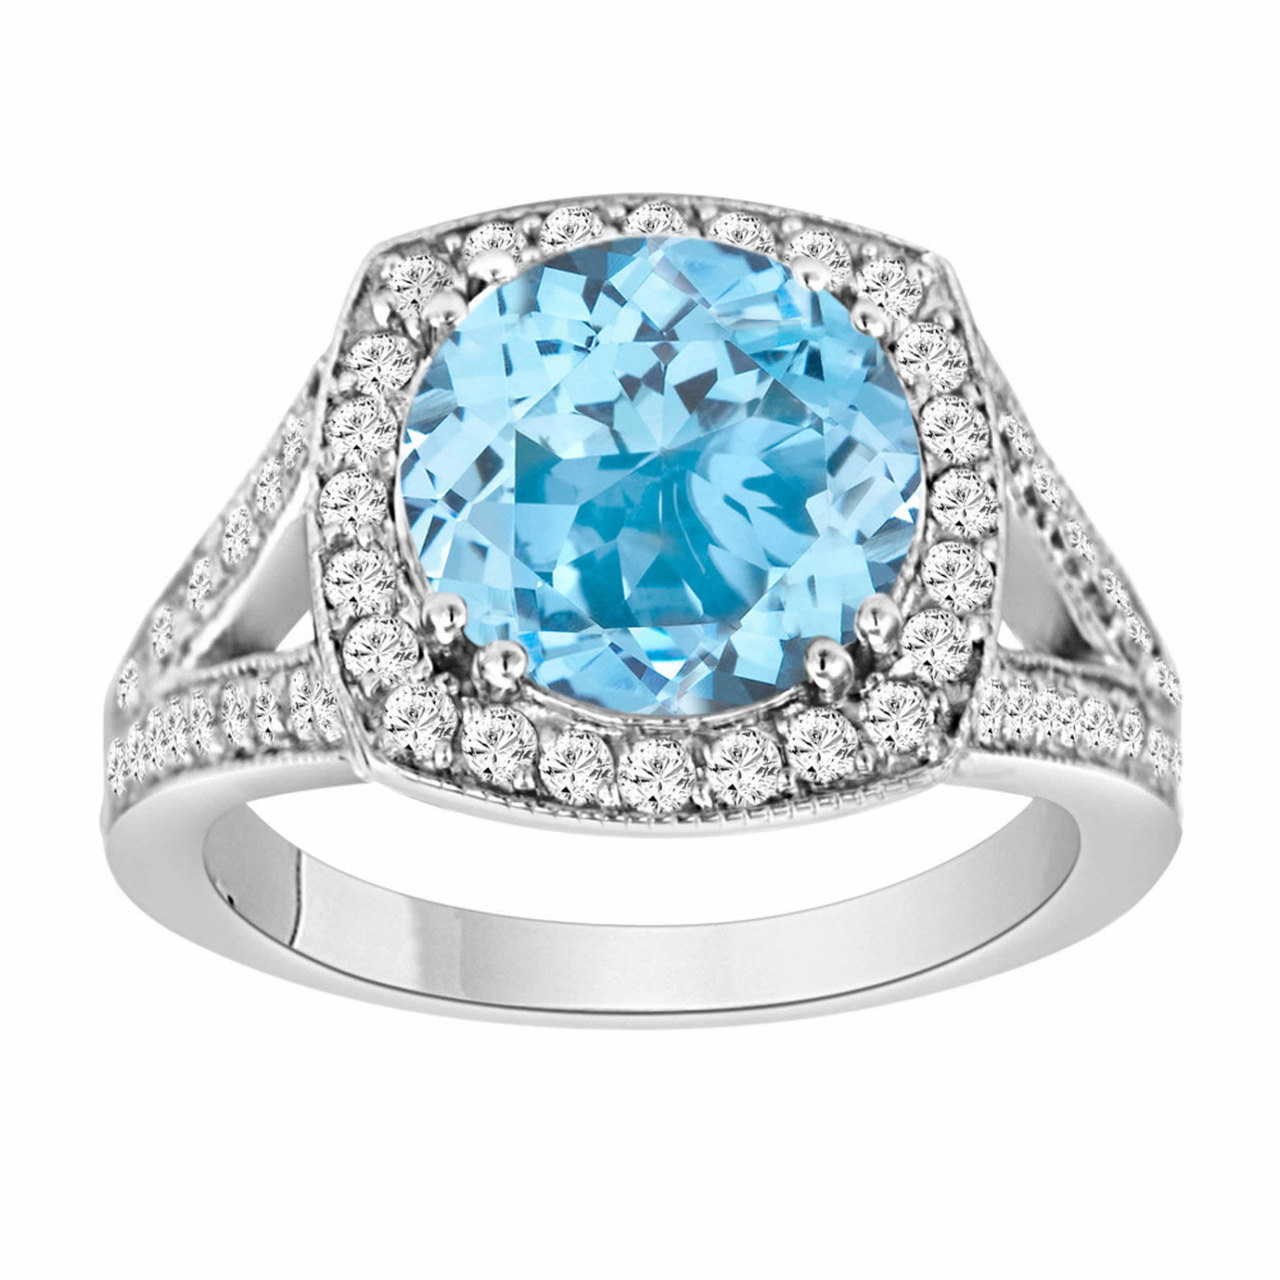 Enchanted Disney Cinderella Princess-Cut London Blue Topaz and 3/8 CT. T.W.  Diamond Engagement Ring in 14K White Gold | Zales